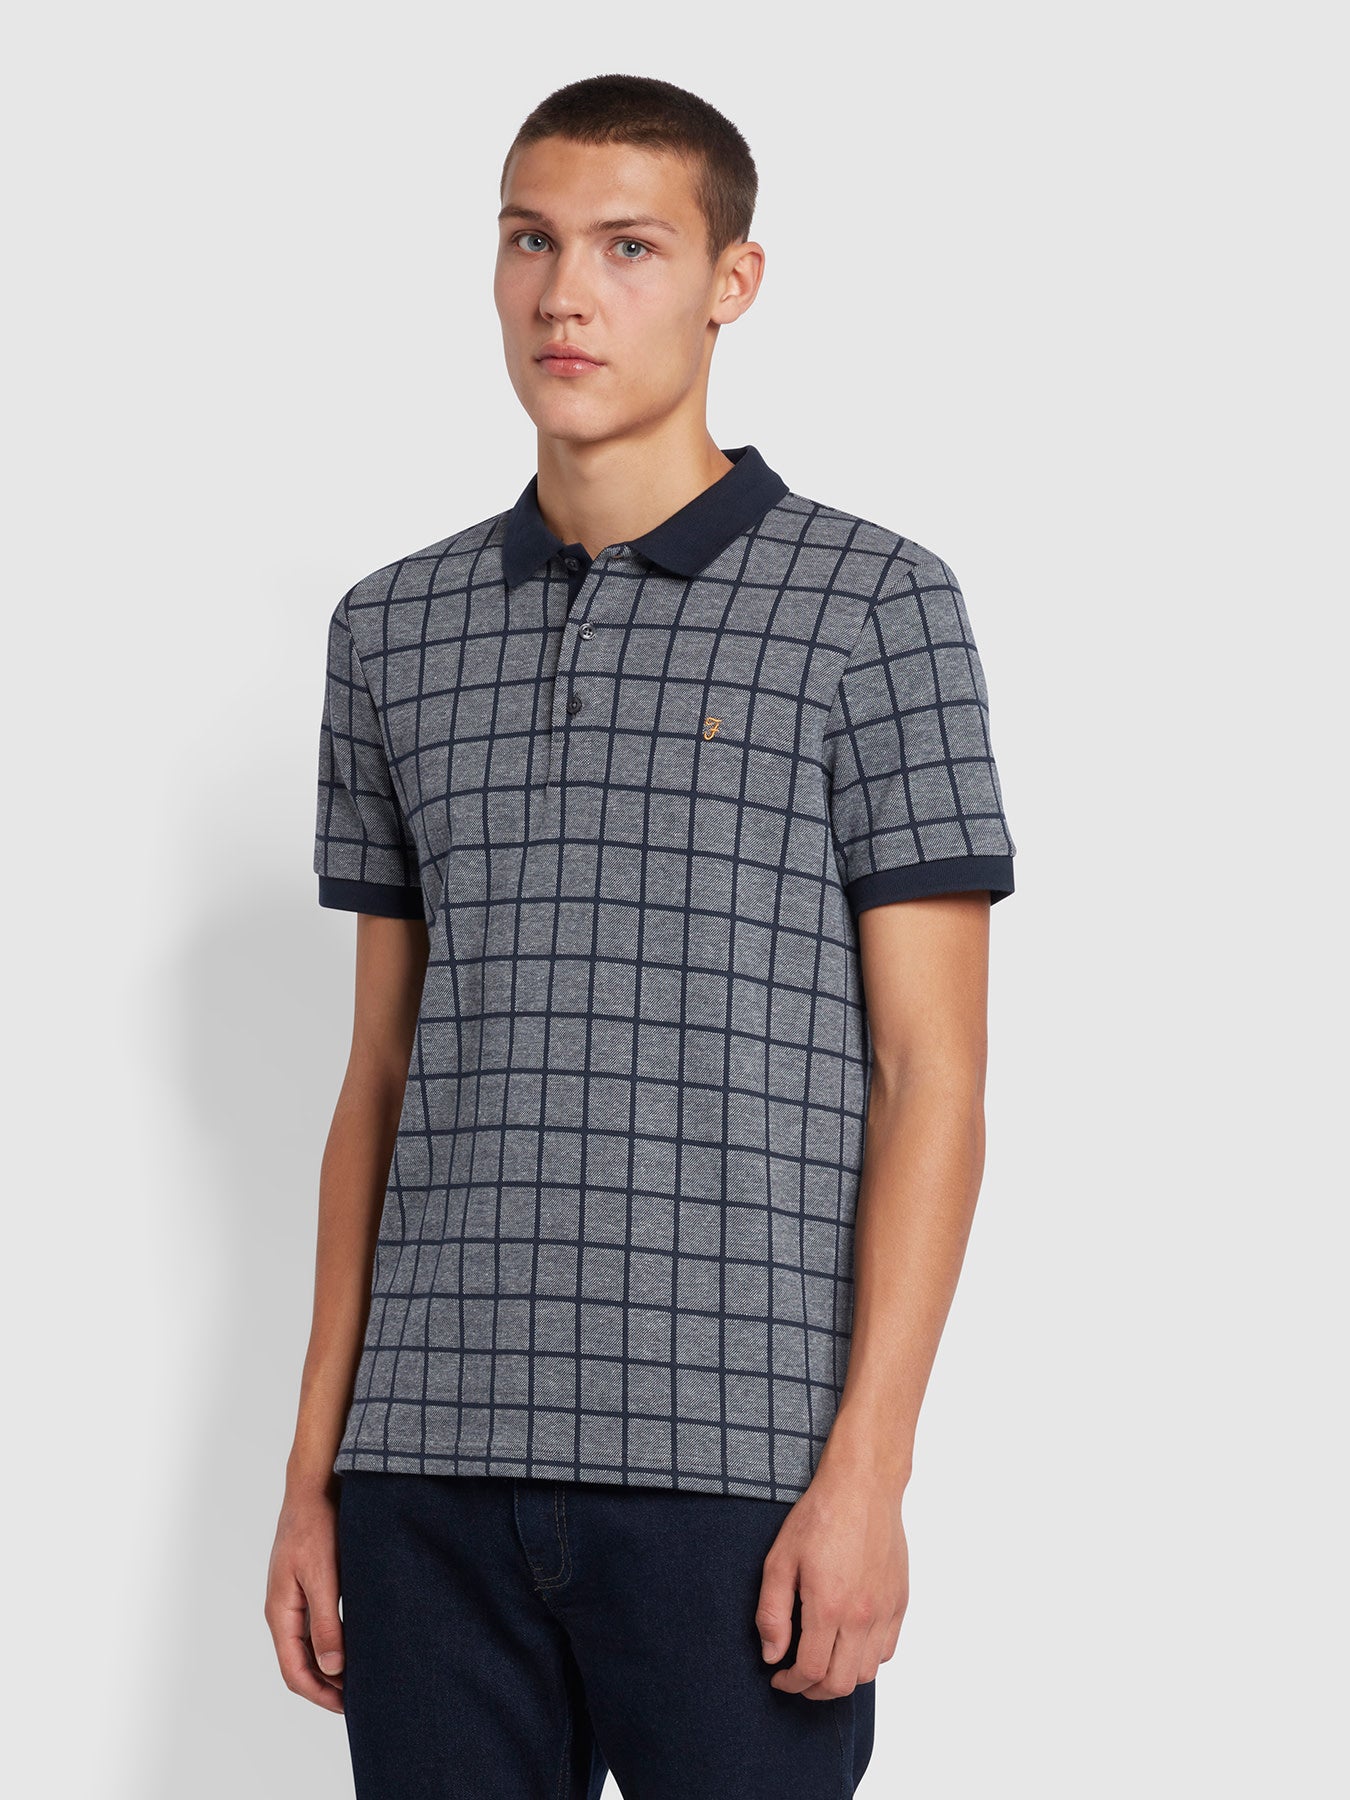 View Hunningale Slim Fit Check Polo Shirt In Grey Marl information